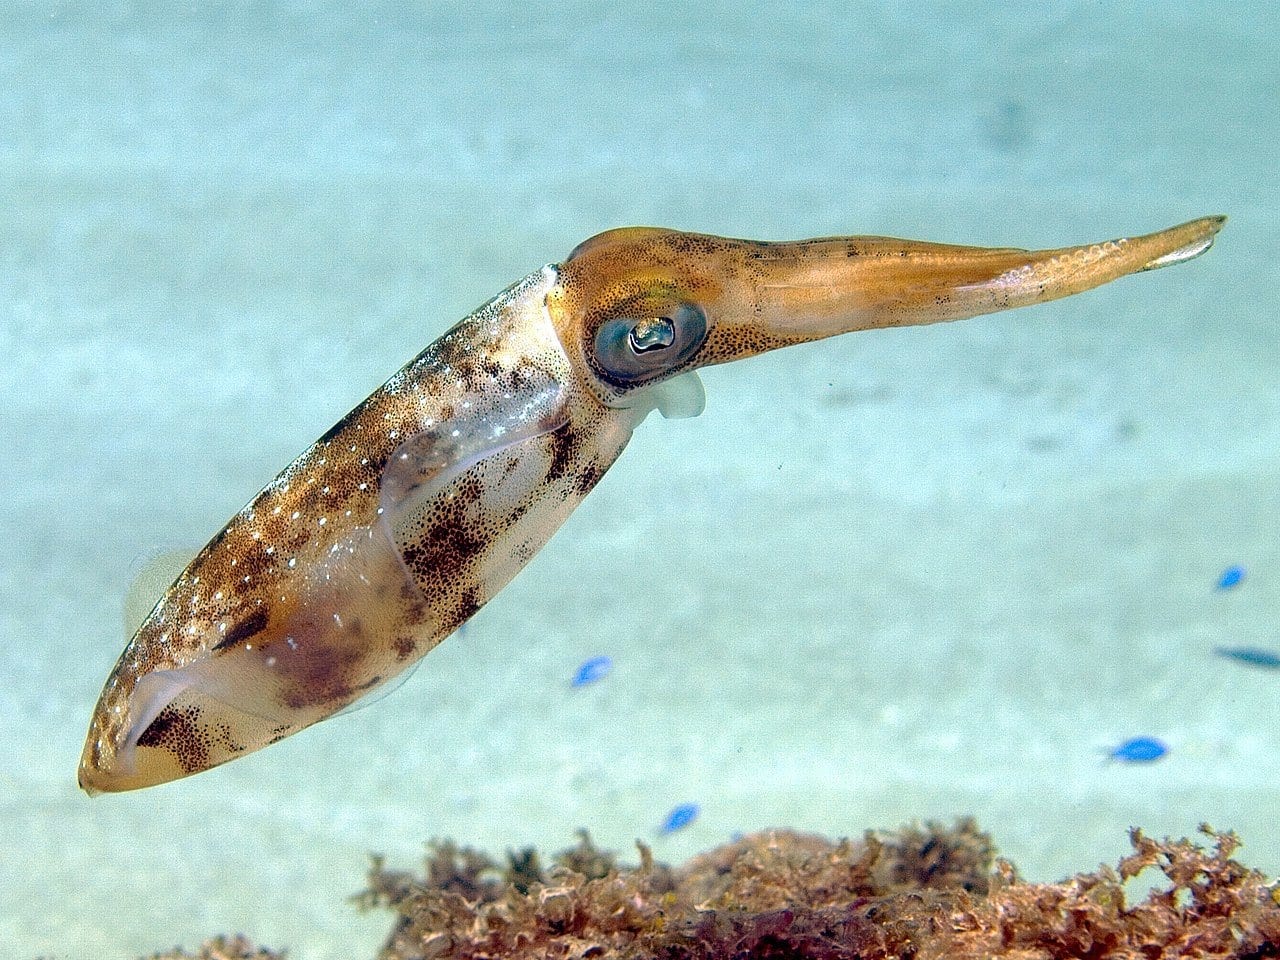 Could squid provide an eco-friendly alternative to plastics?